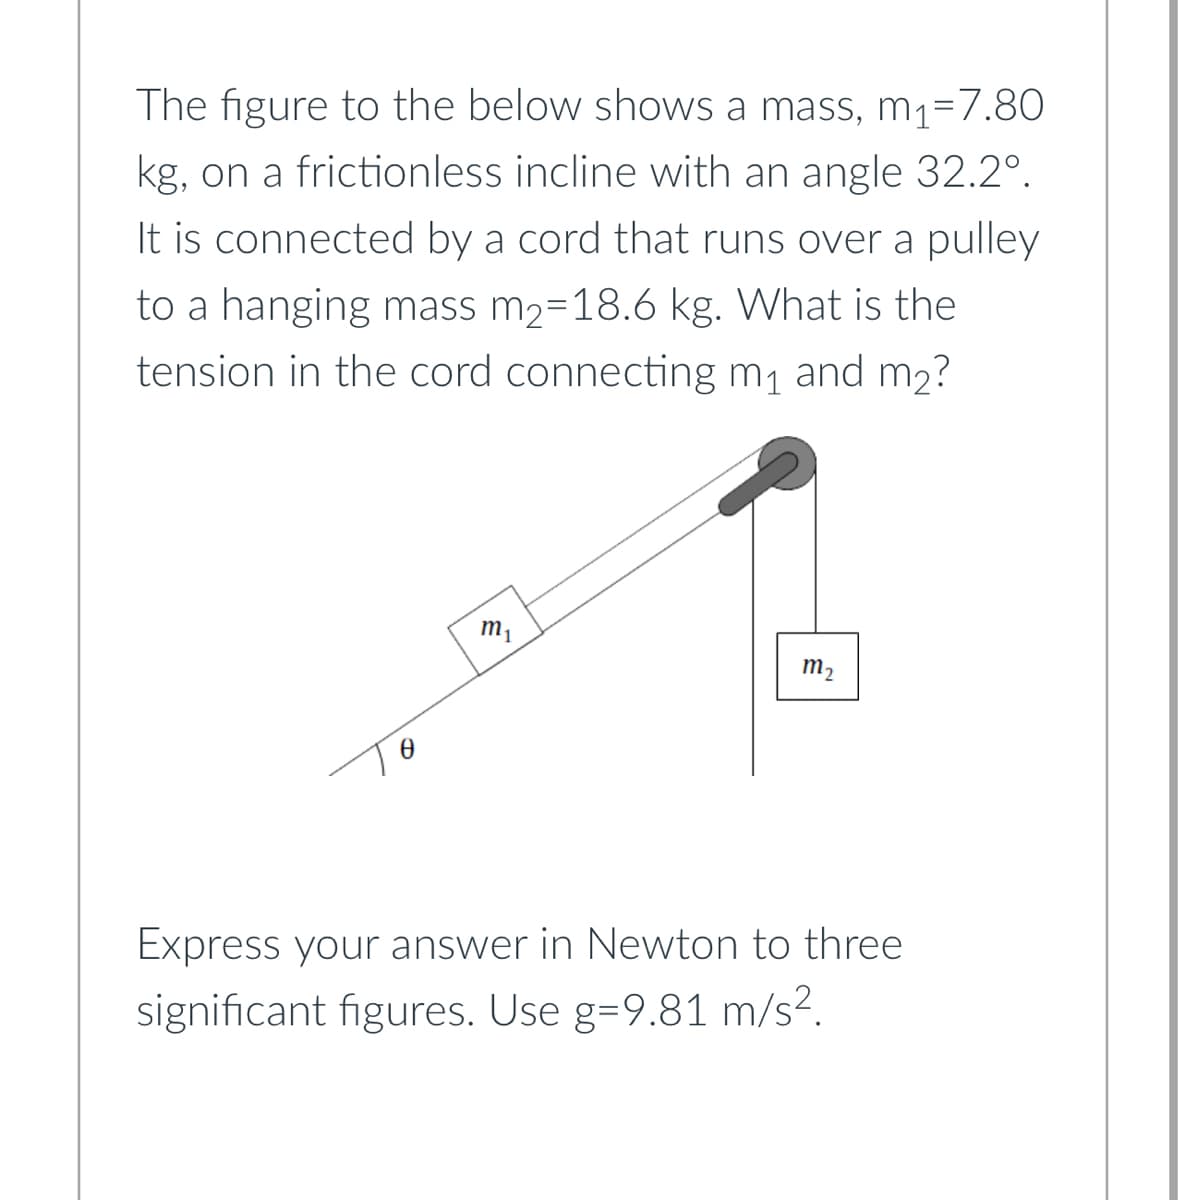 The figure to the below shows a mass, m₁-7.80
kg, on a frictionless incline with an angle 32.2º.
It is connected by a cord that runs over a pulley
to a hanging mass m₂=18.6 kg. What is the
tension in the cord connecting m₁ and m₂?
0
m₁
m₂
Express your answer in Newton to three
significant figures. Use g=9.81 m/s².